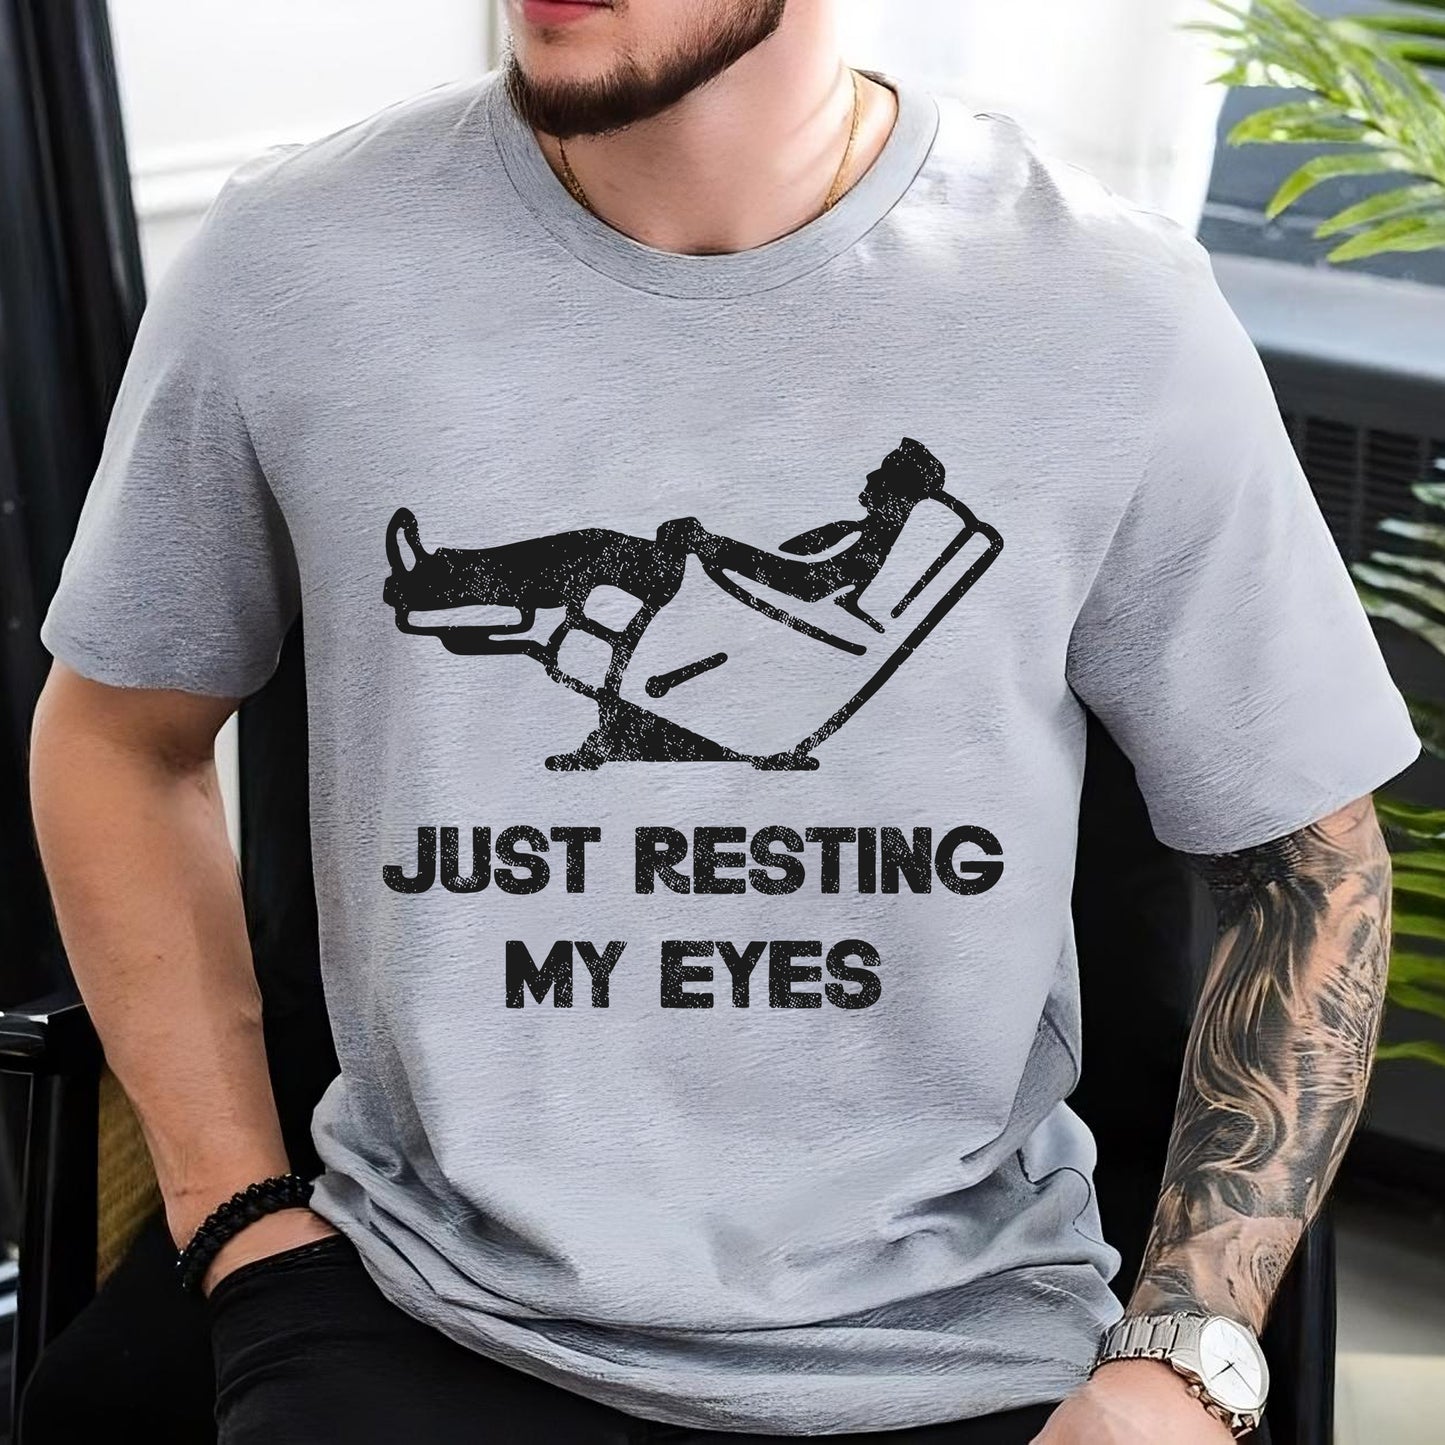 Just Resting My Eyes Shirt, Funny Dad Gift